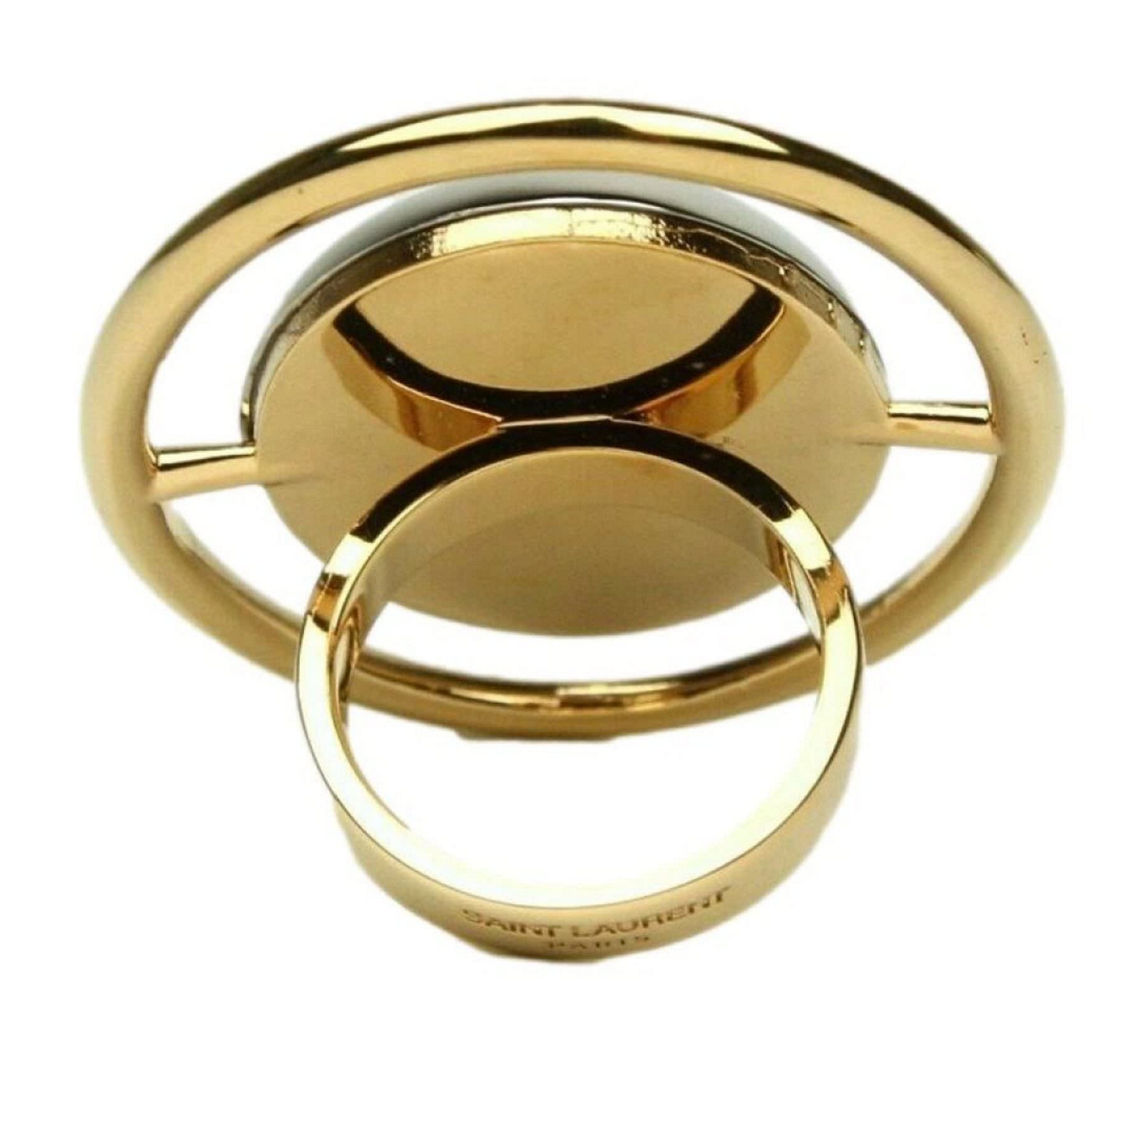 Saint Laurent Oval Brass Metal Circular Ring Size 6 Silver/Gold (New) - Image 4 of 5